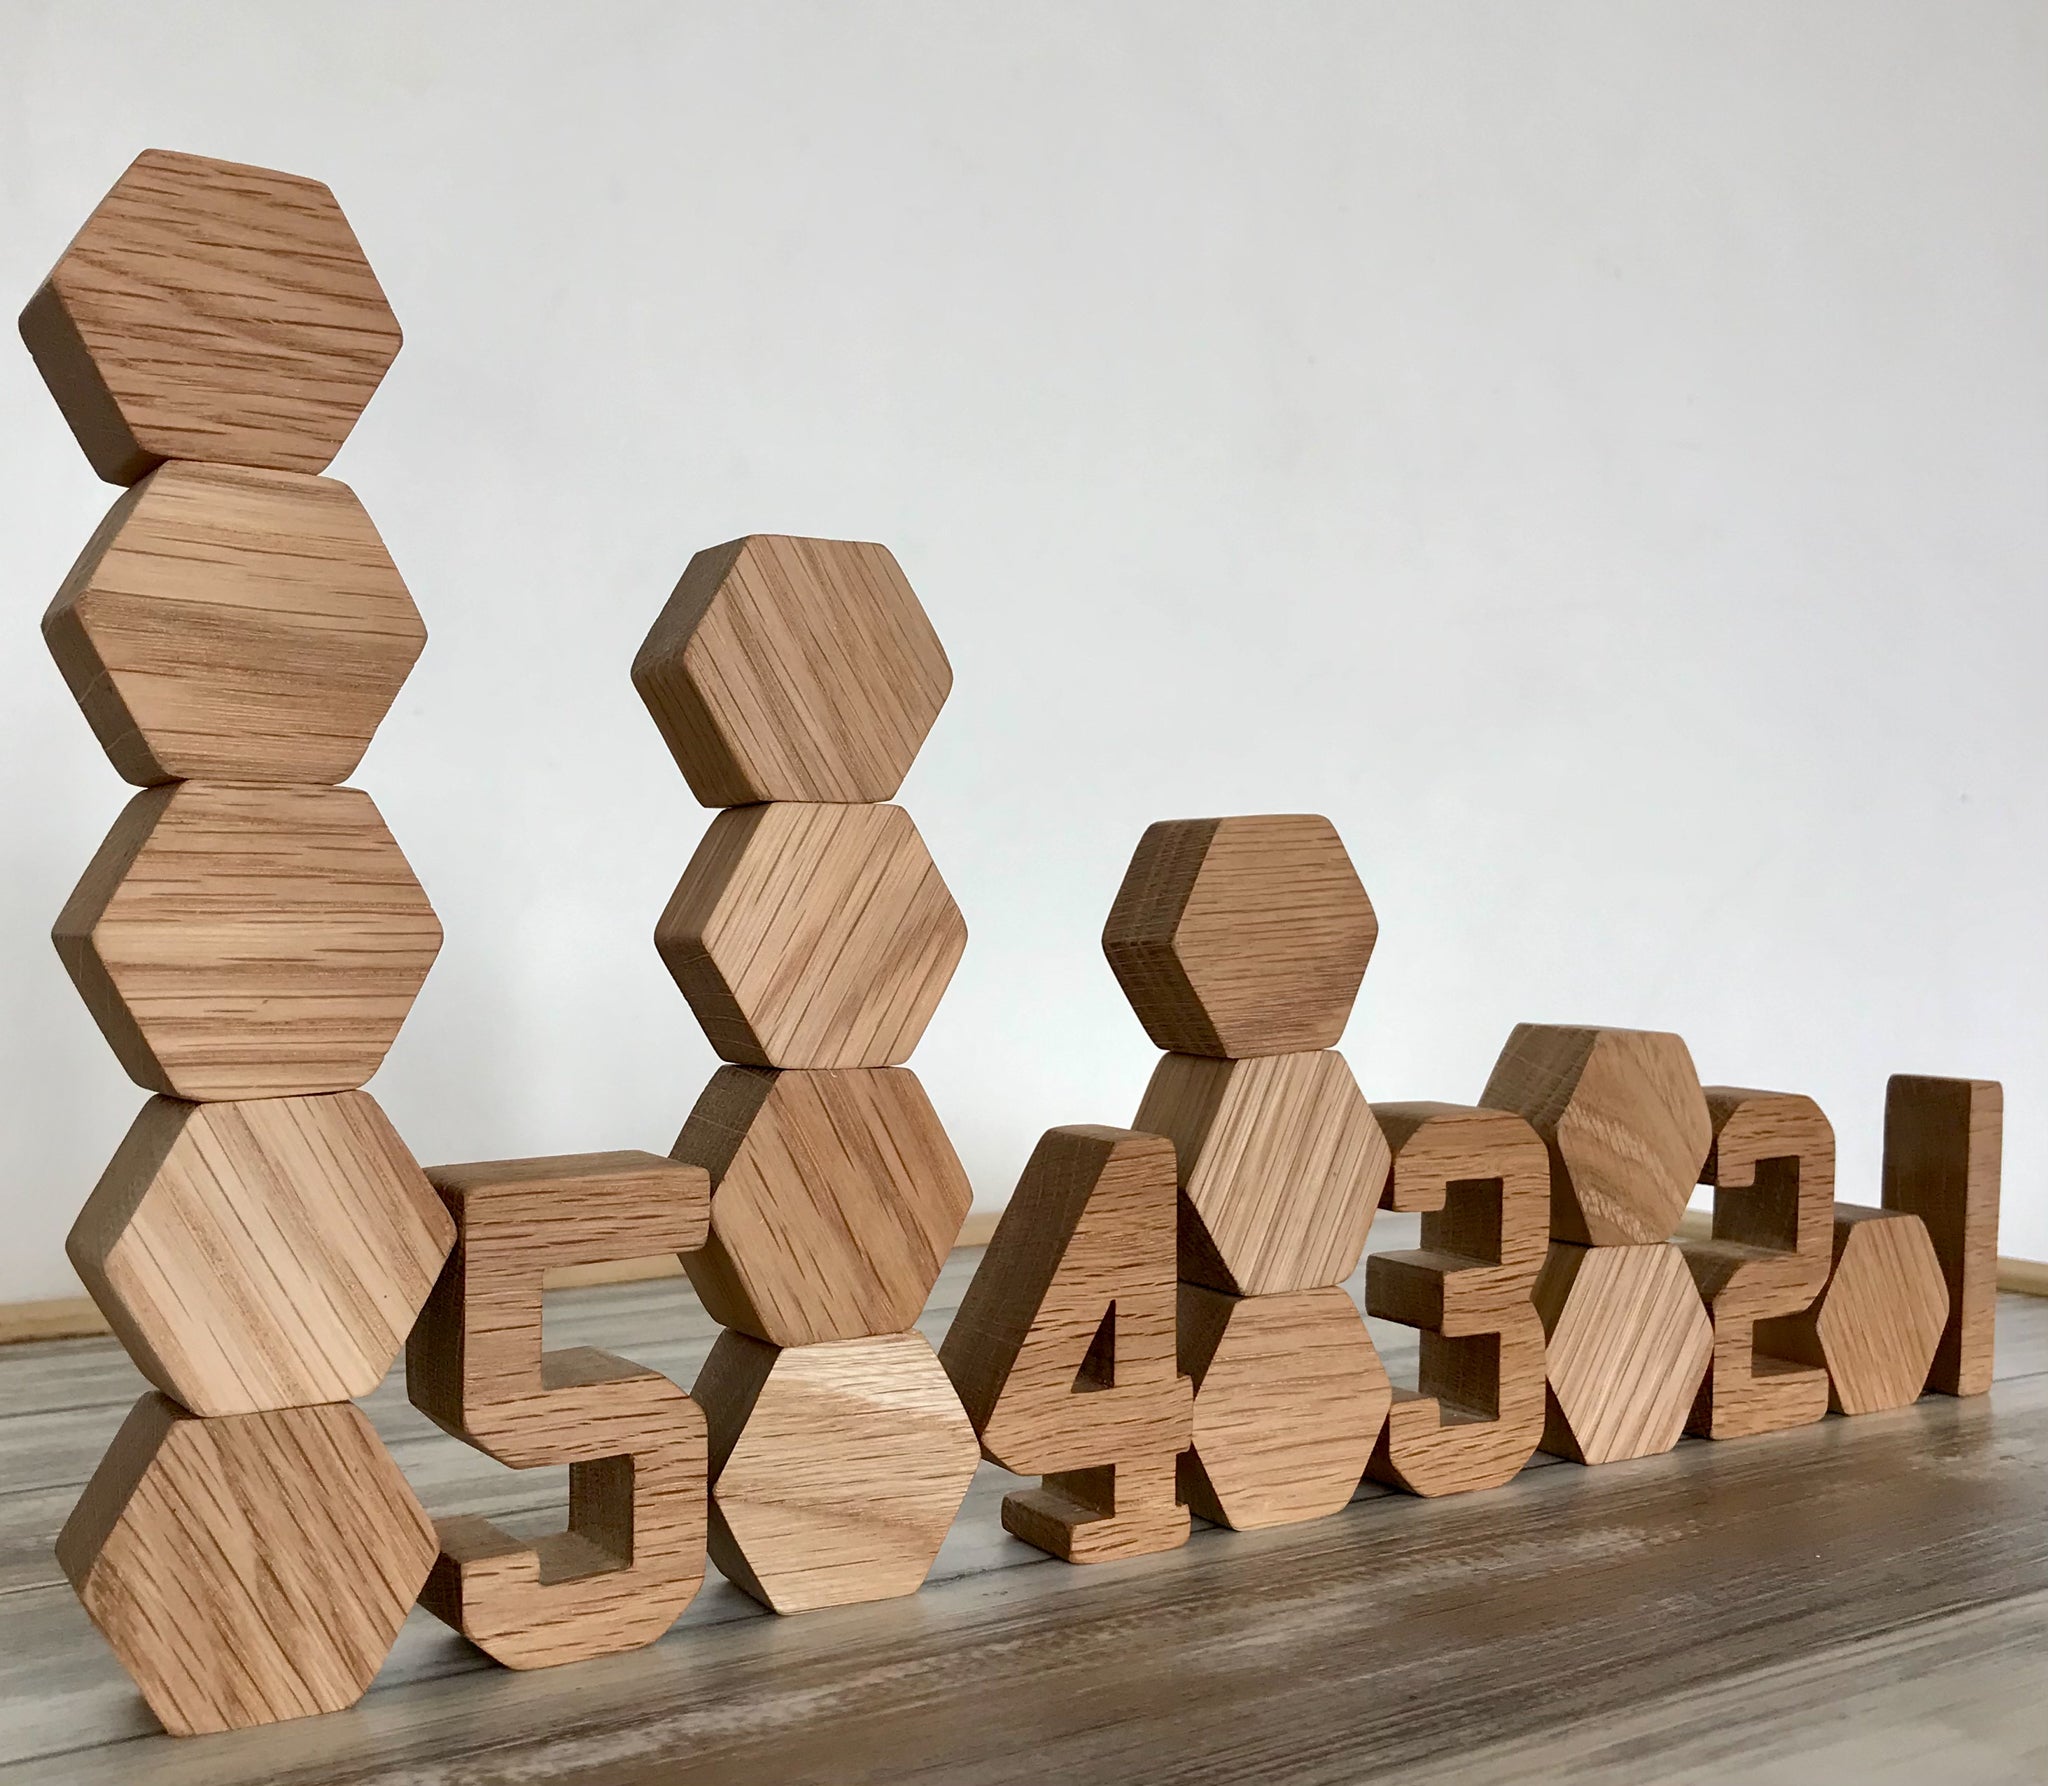 Wooden hexagon block toys stacked on top of each other in towers with wooden numbers next to each tower